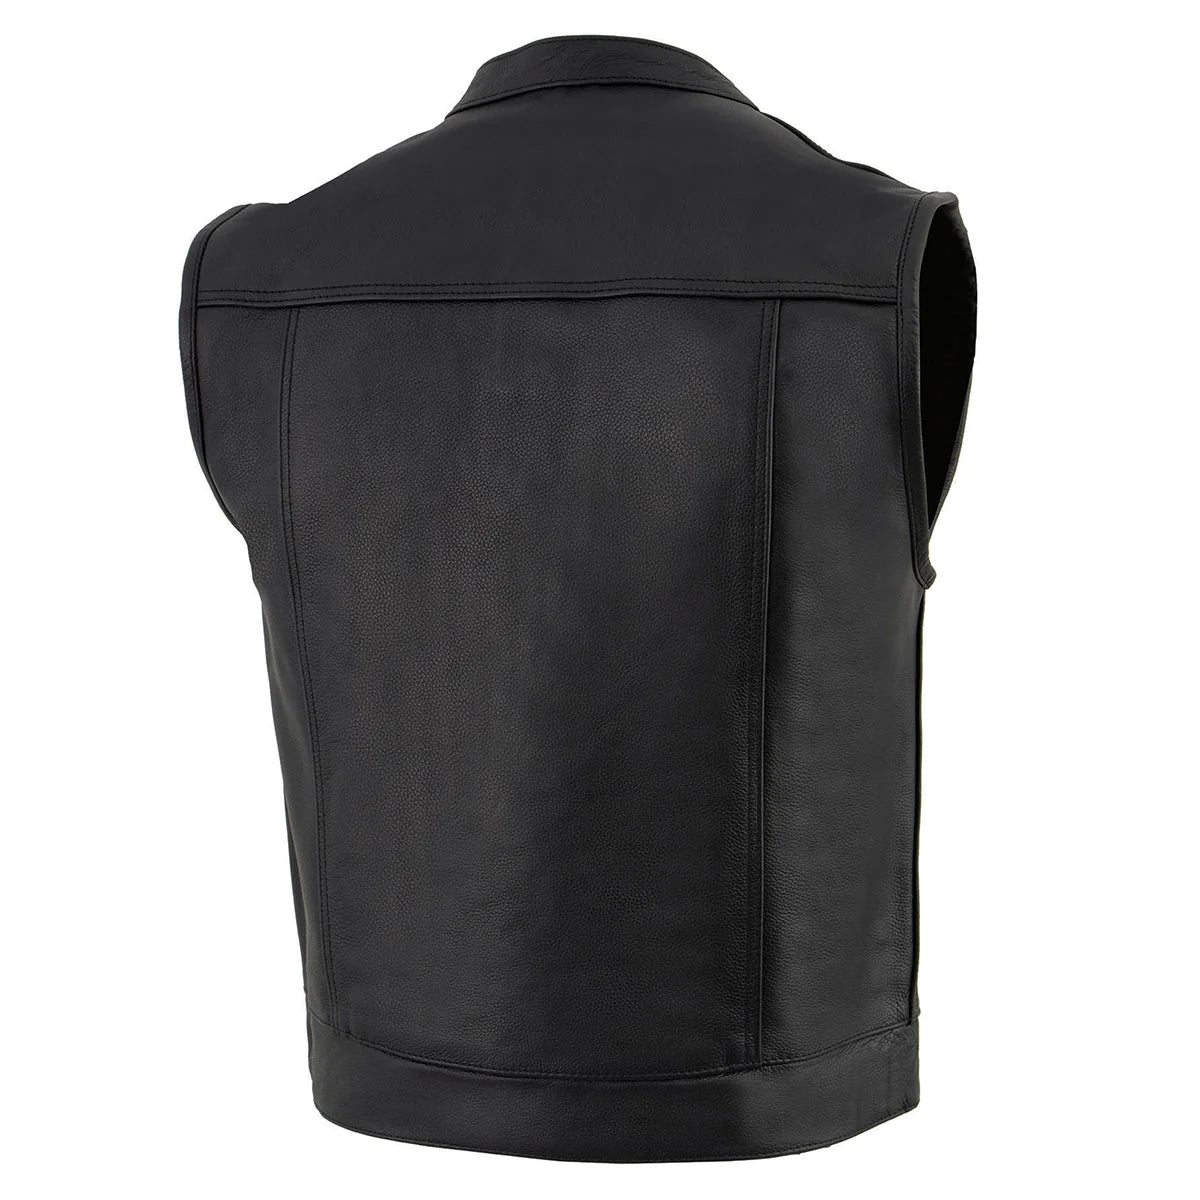 Men's Black Motorcycle Club Style Leather Vest with Concealed Snap Button Closure